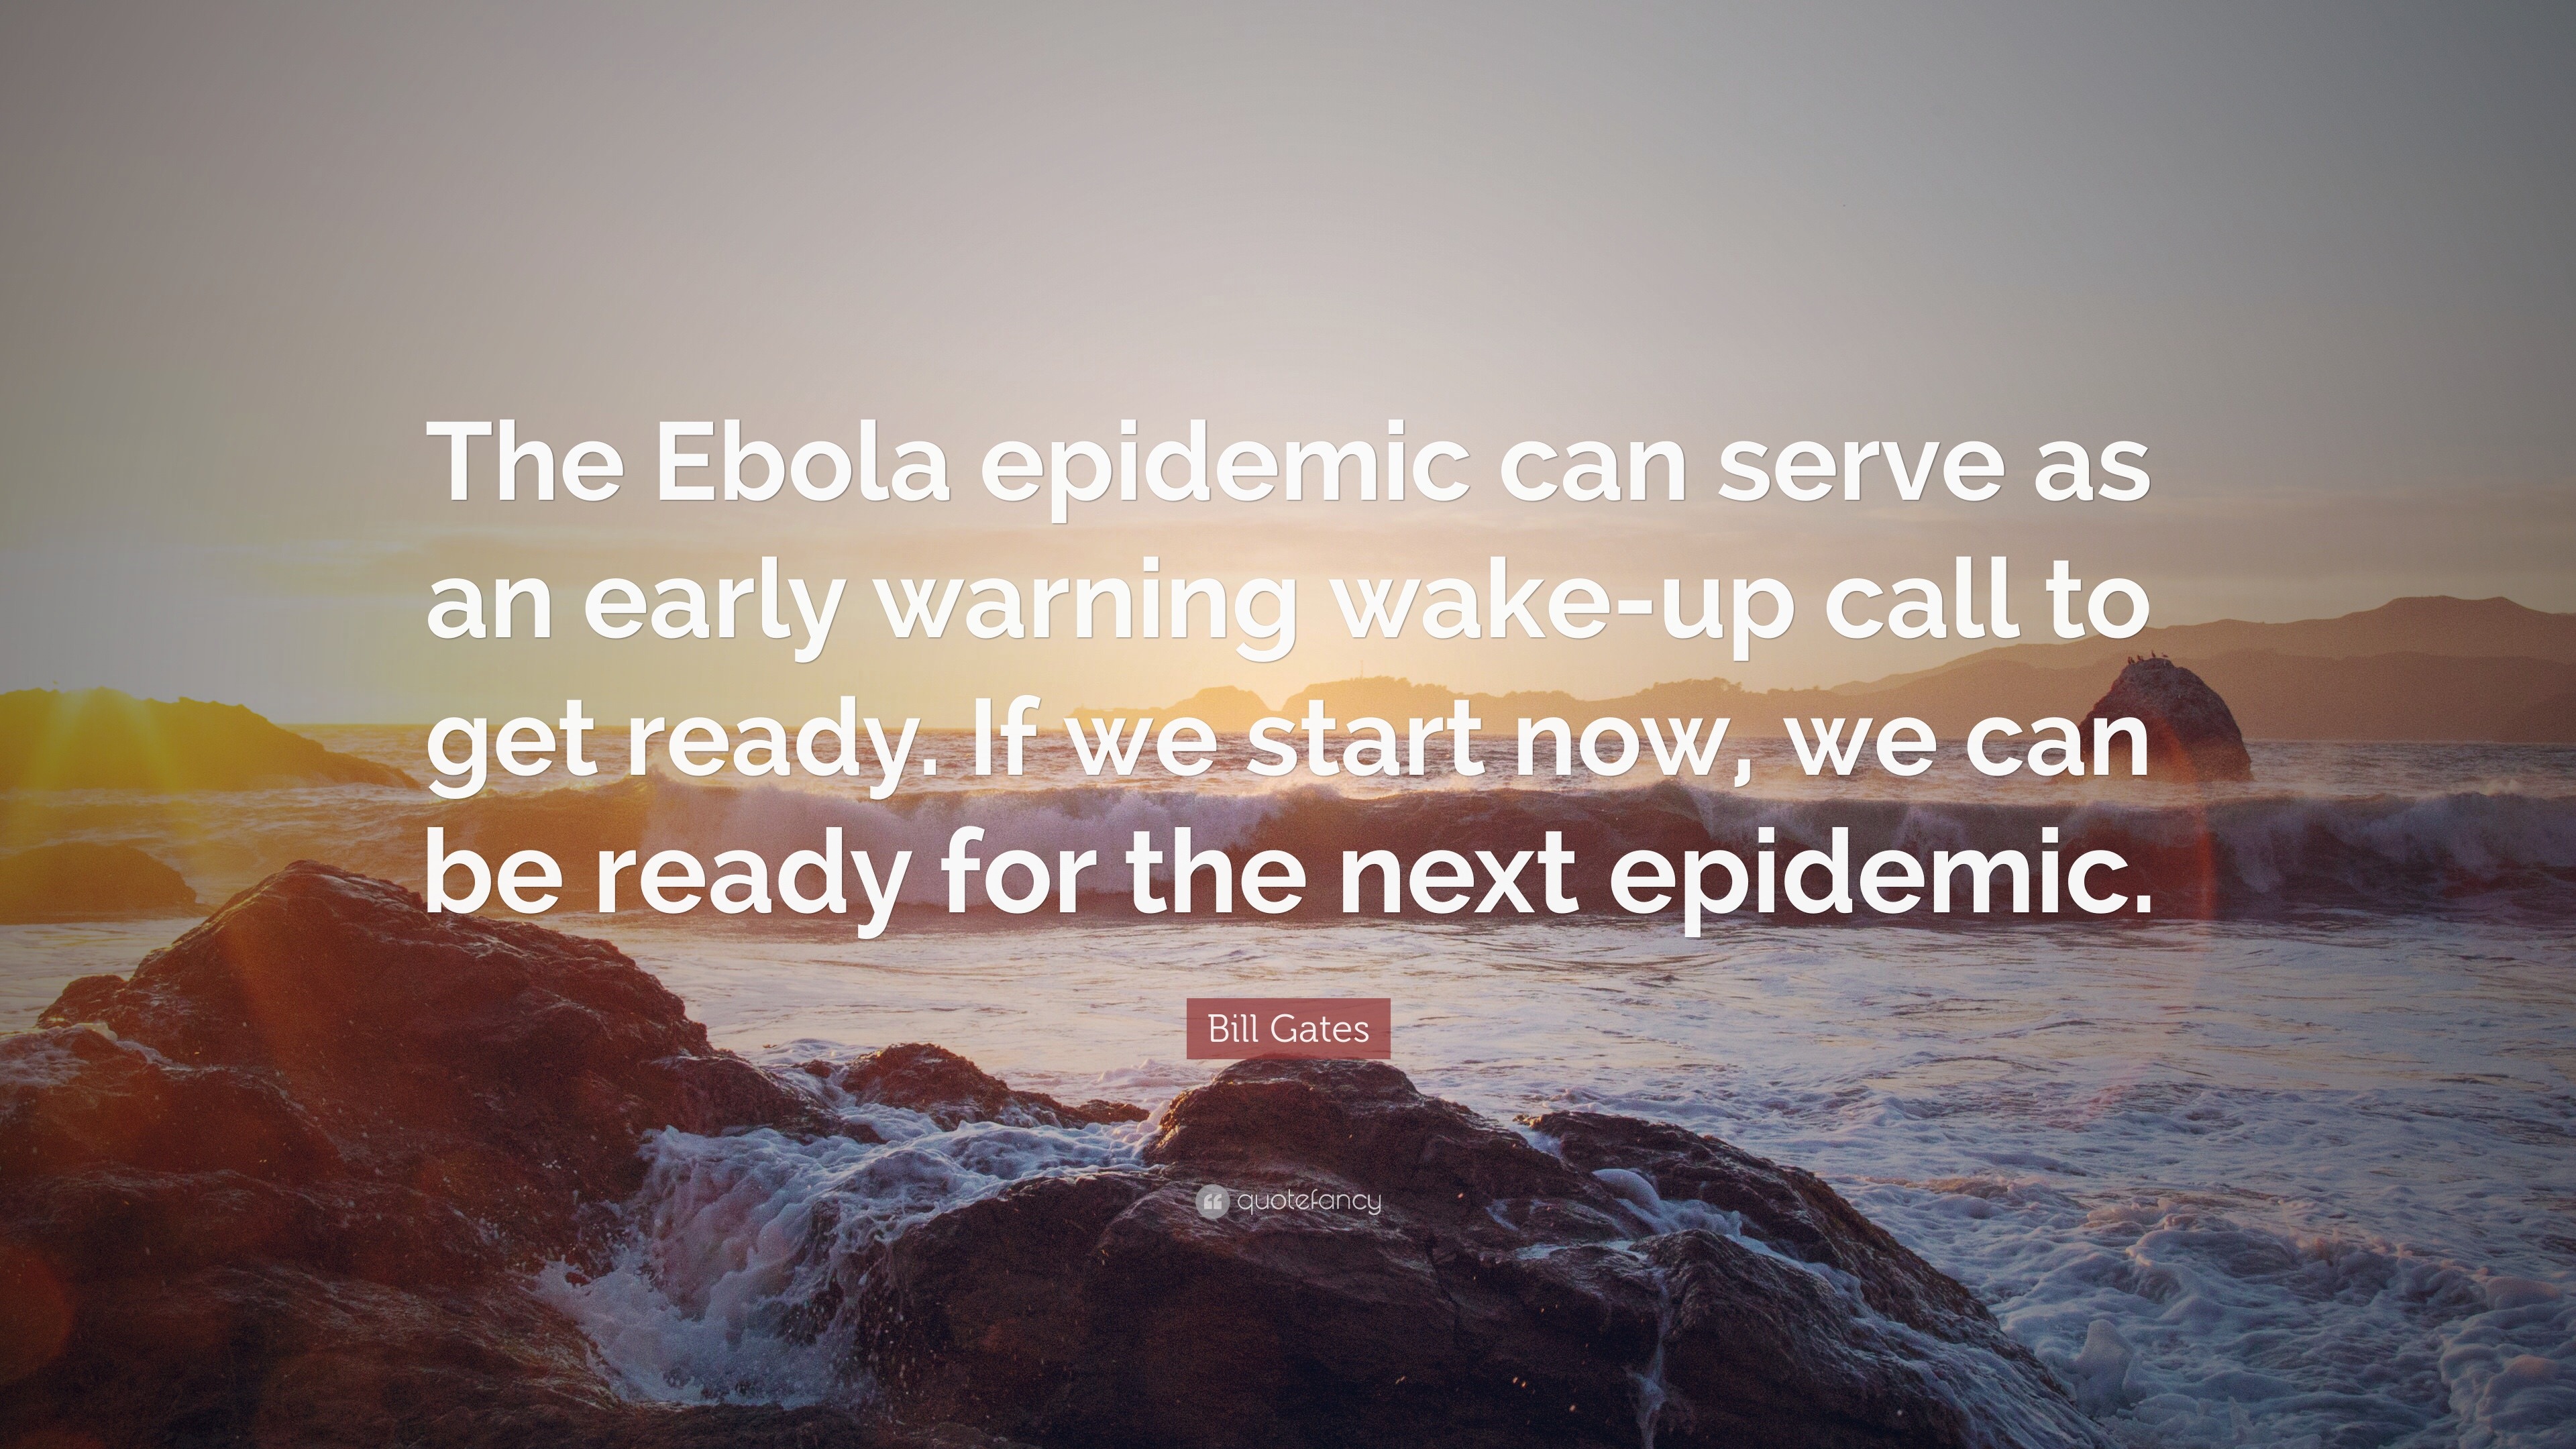 Bill Gates Quote The Ebola Epidemic Can Serve As An Early Warning Wake Up Call To Get Ready If We Start Now We Can Be Ready For The Nex